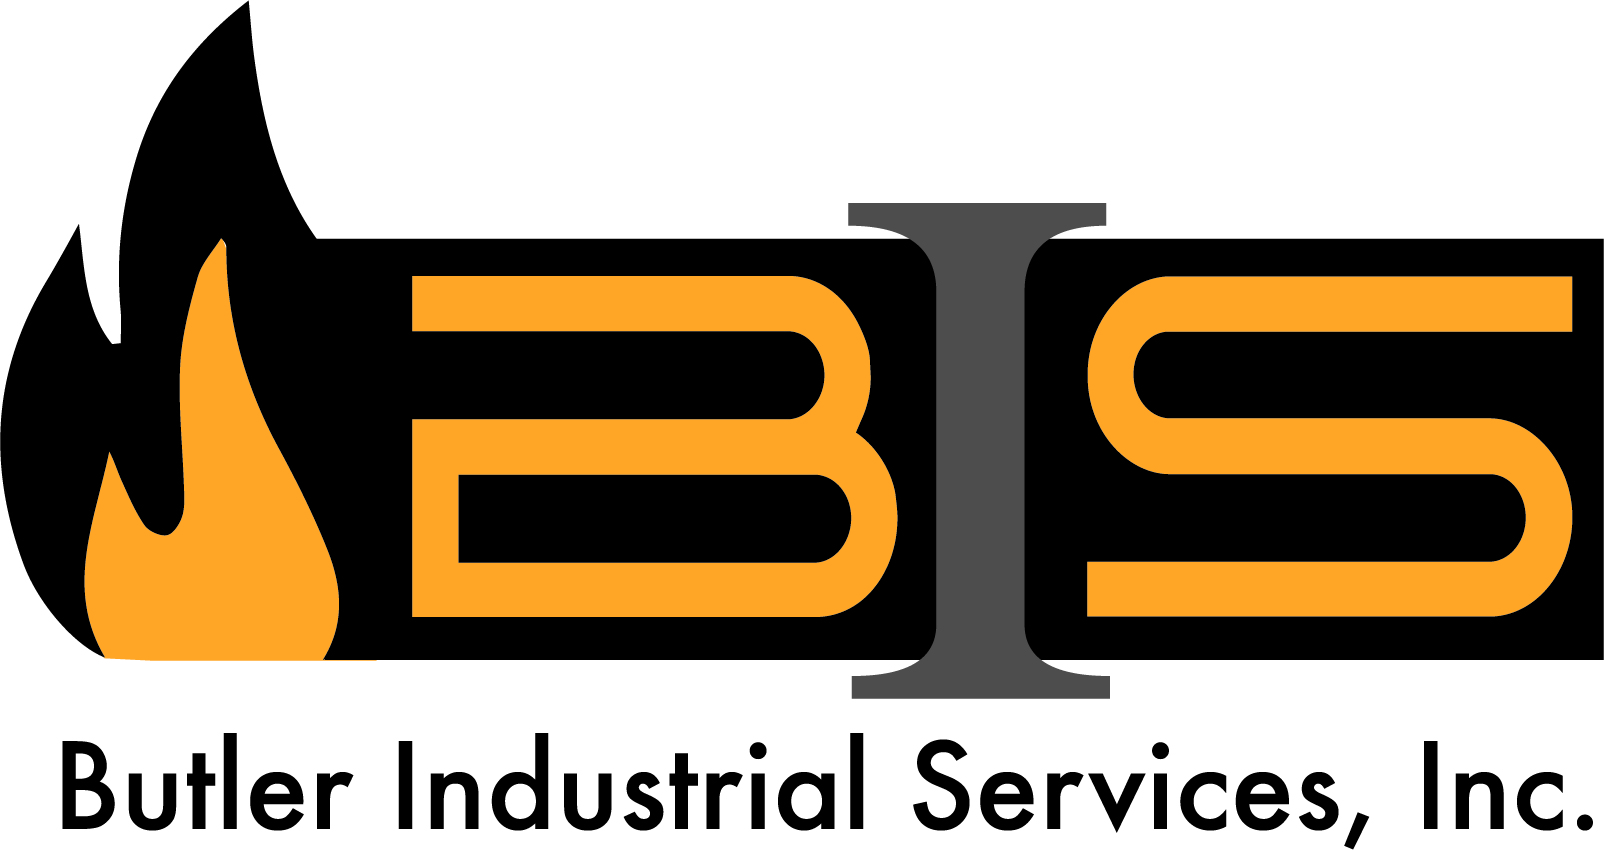 Butler Industrial Services, Inc.